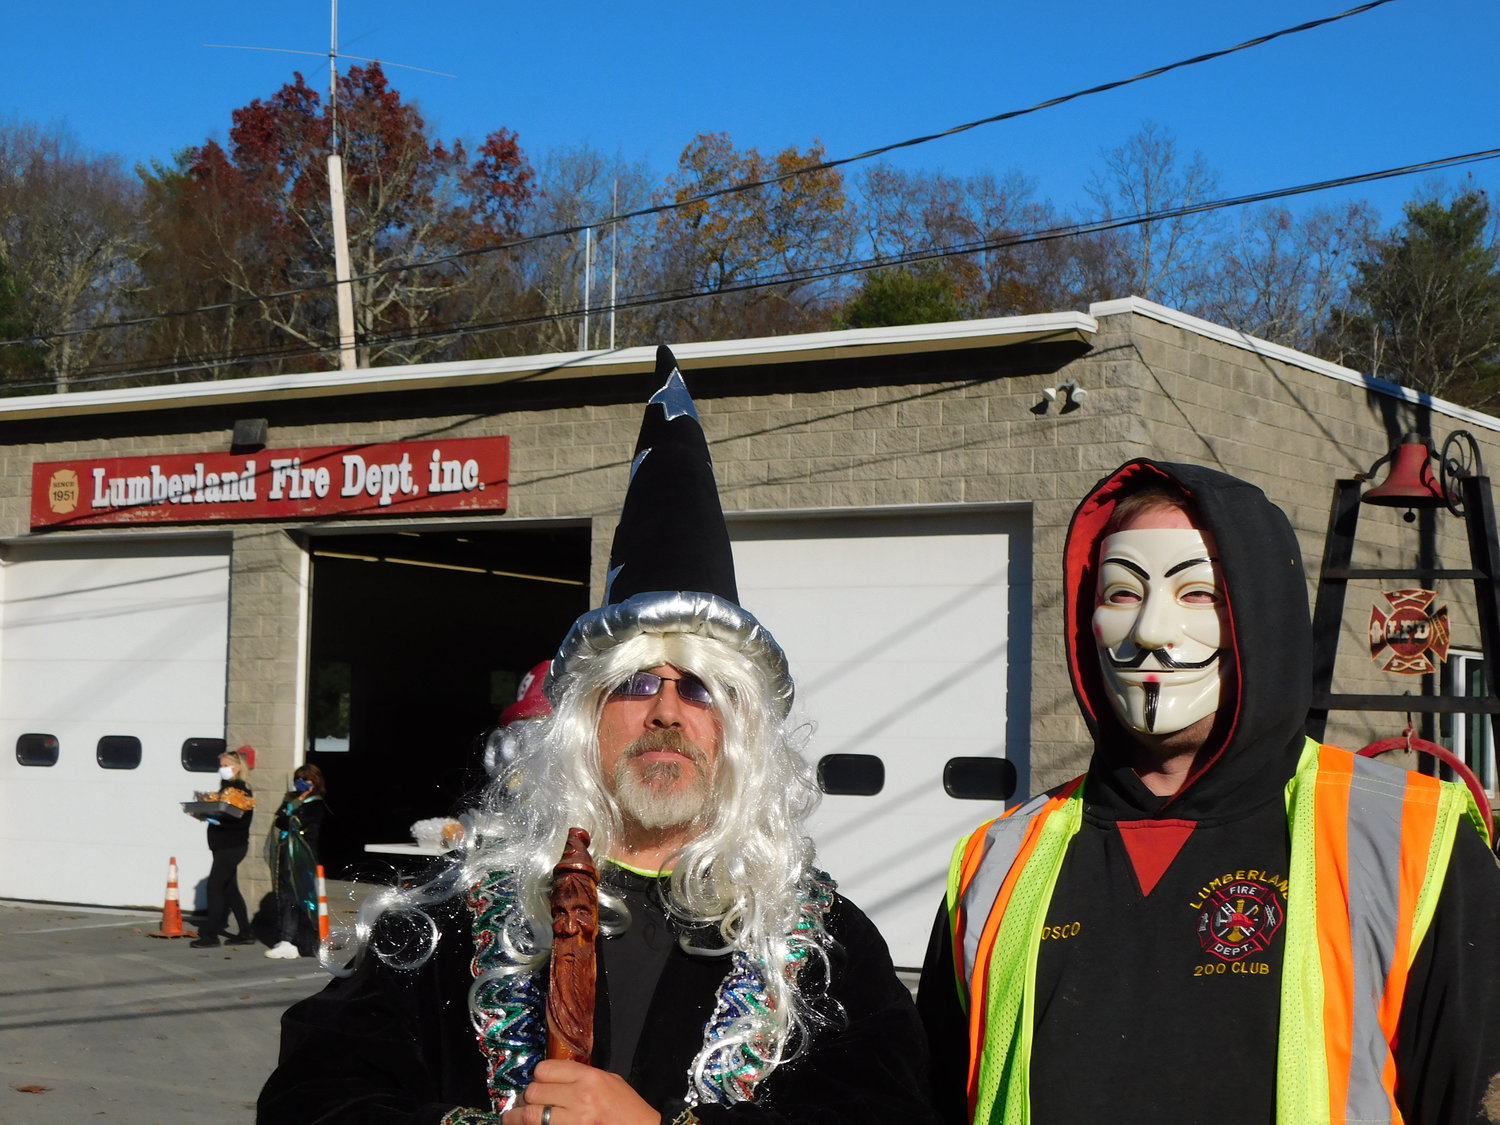 The Wizard is fireman Eric Robles and the man in the Guy Fawkes mask is fireman Don “Bosco” Hunt.